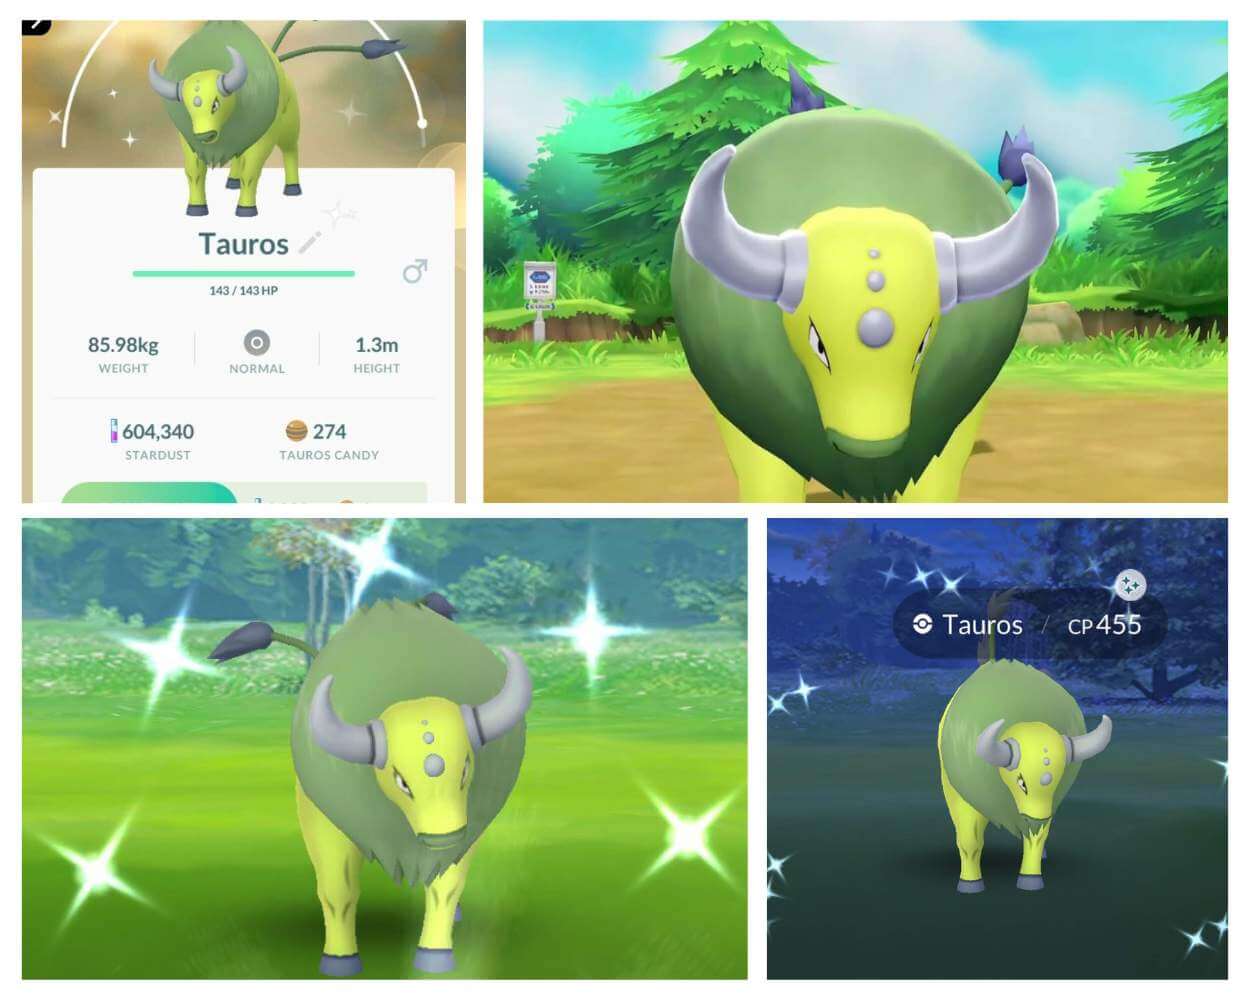 The Shiny Tauros as a Collector's Dream